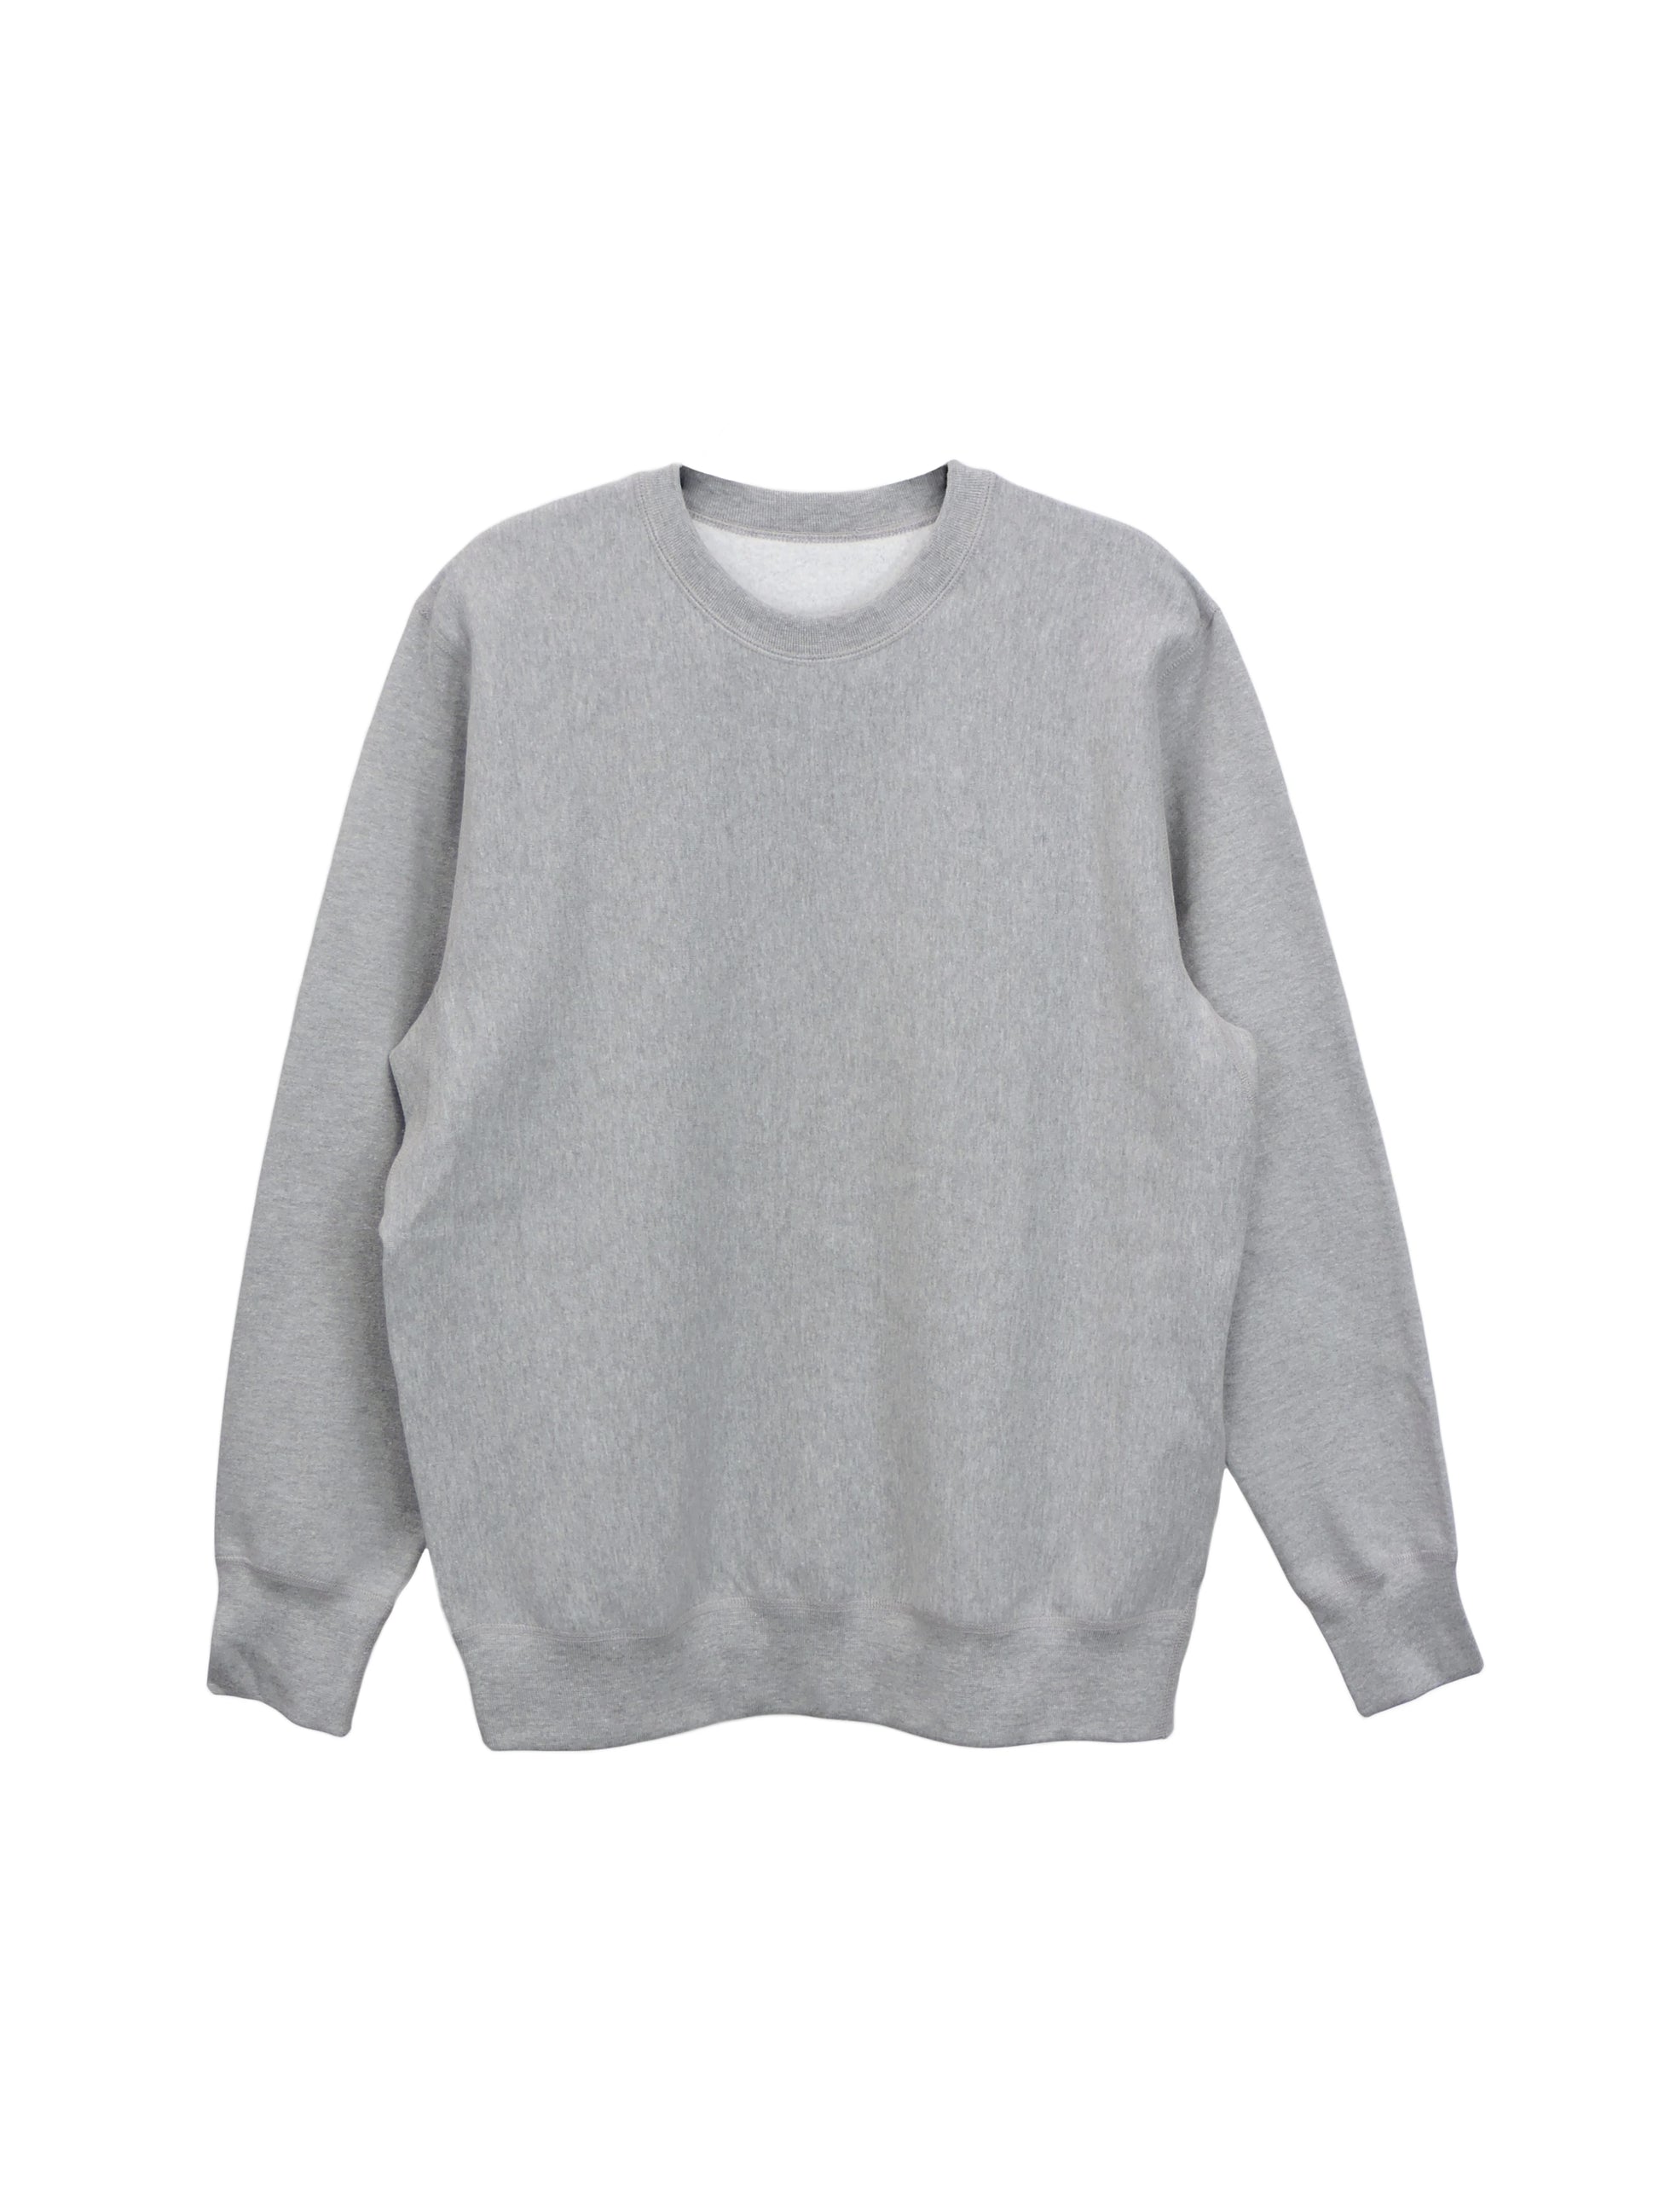 Women's Pure Cashmere Chunky Crew Neck